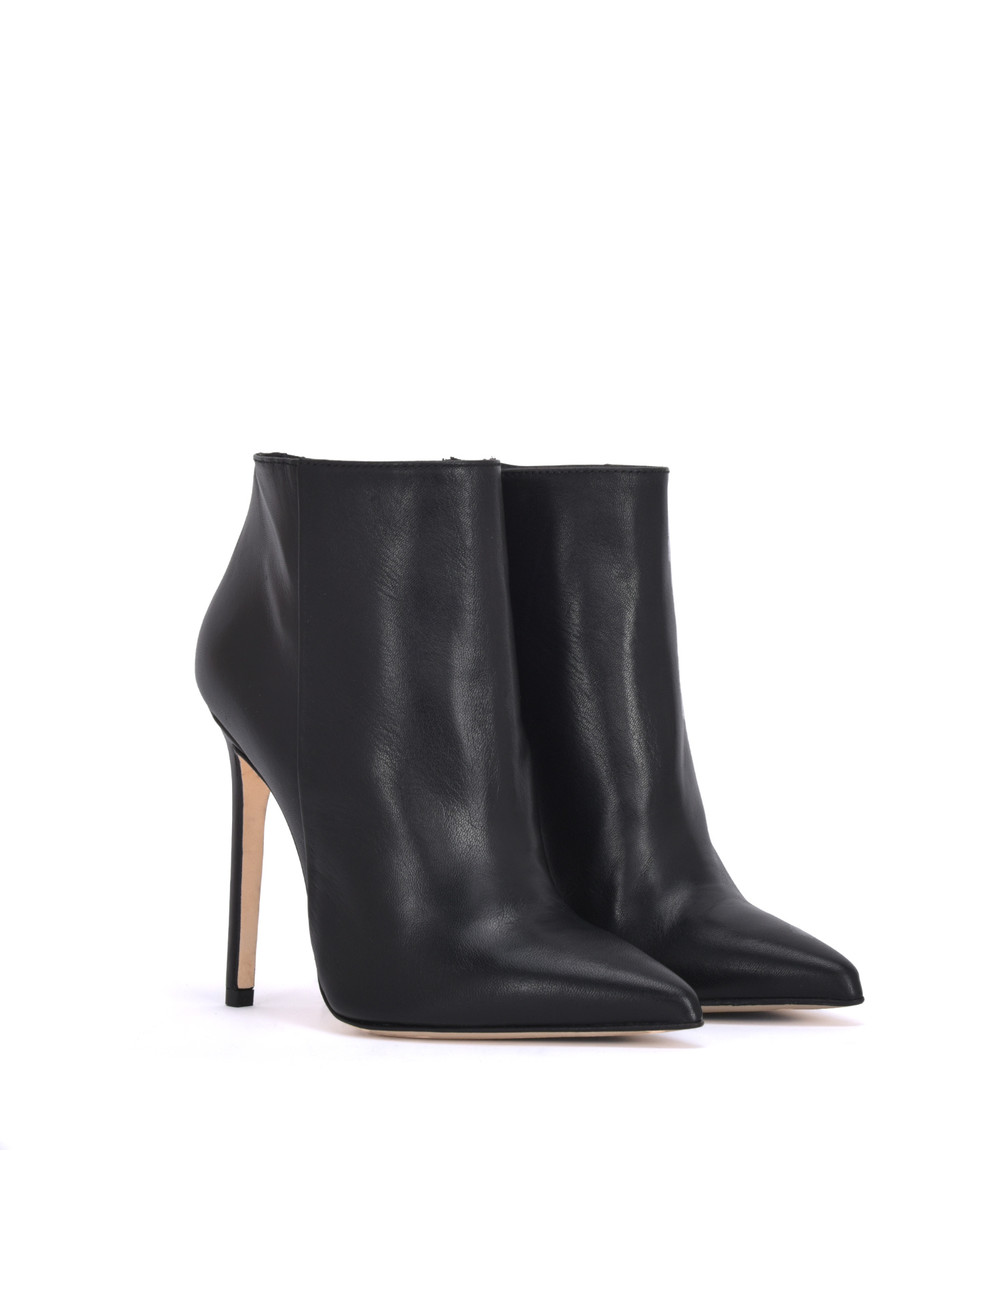 Sanctum Italian ankle boots VESTA with stiletto heels in real leather